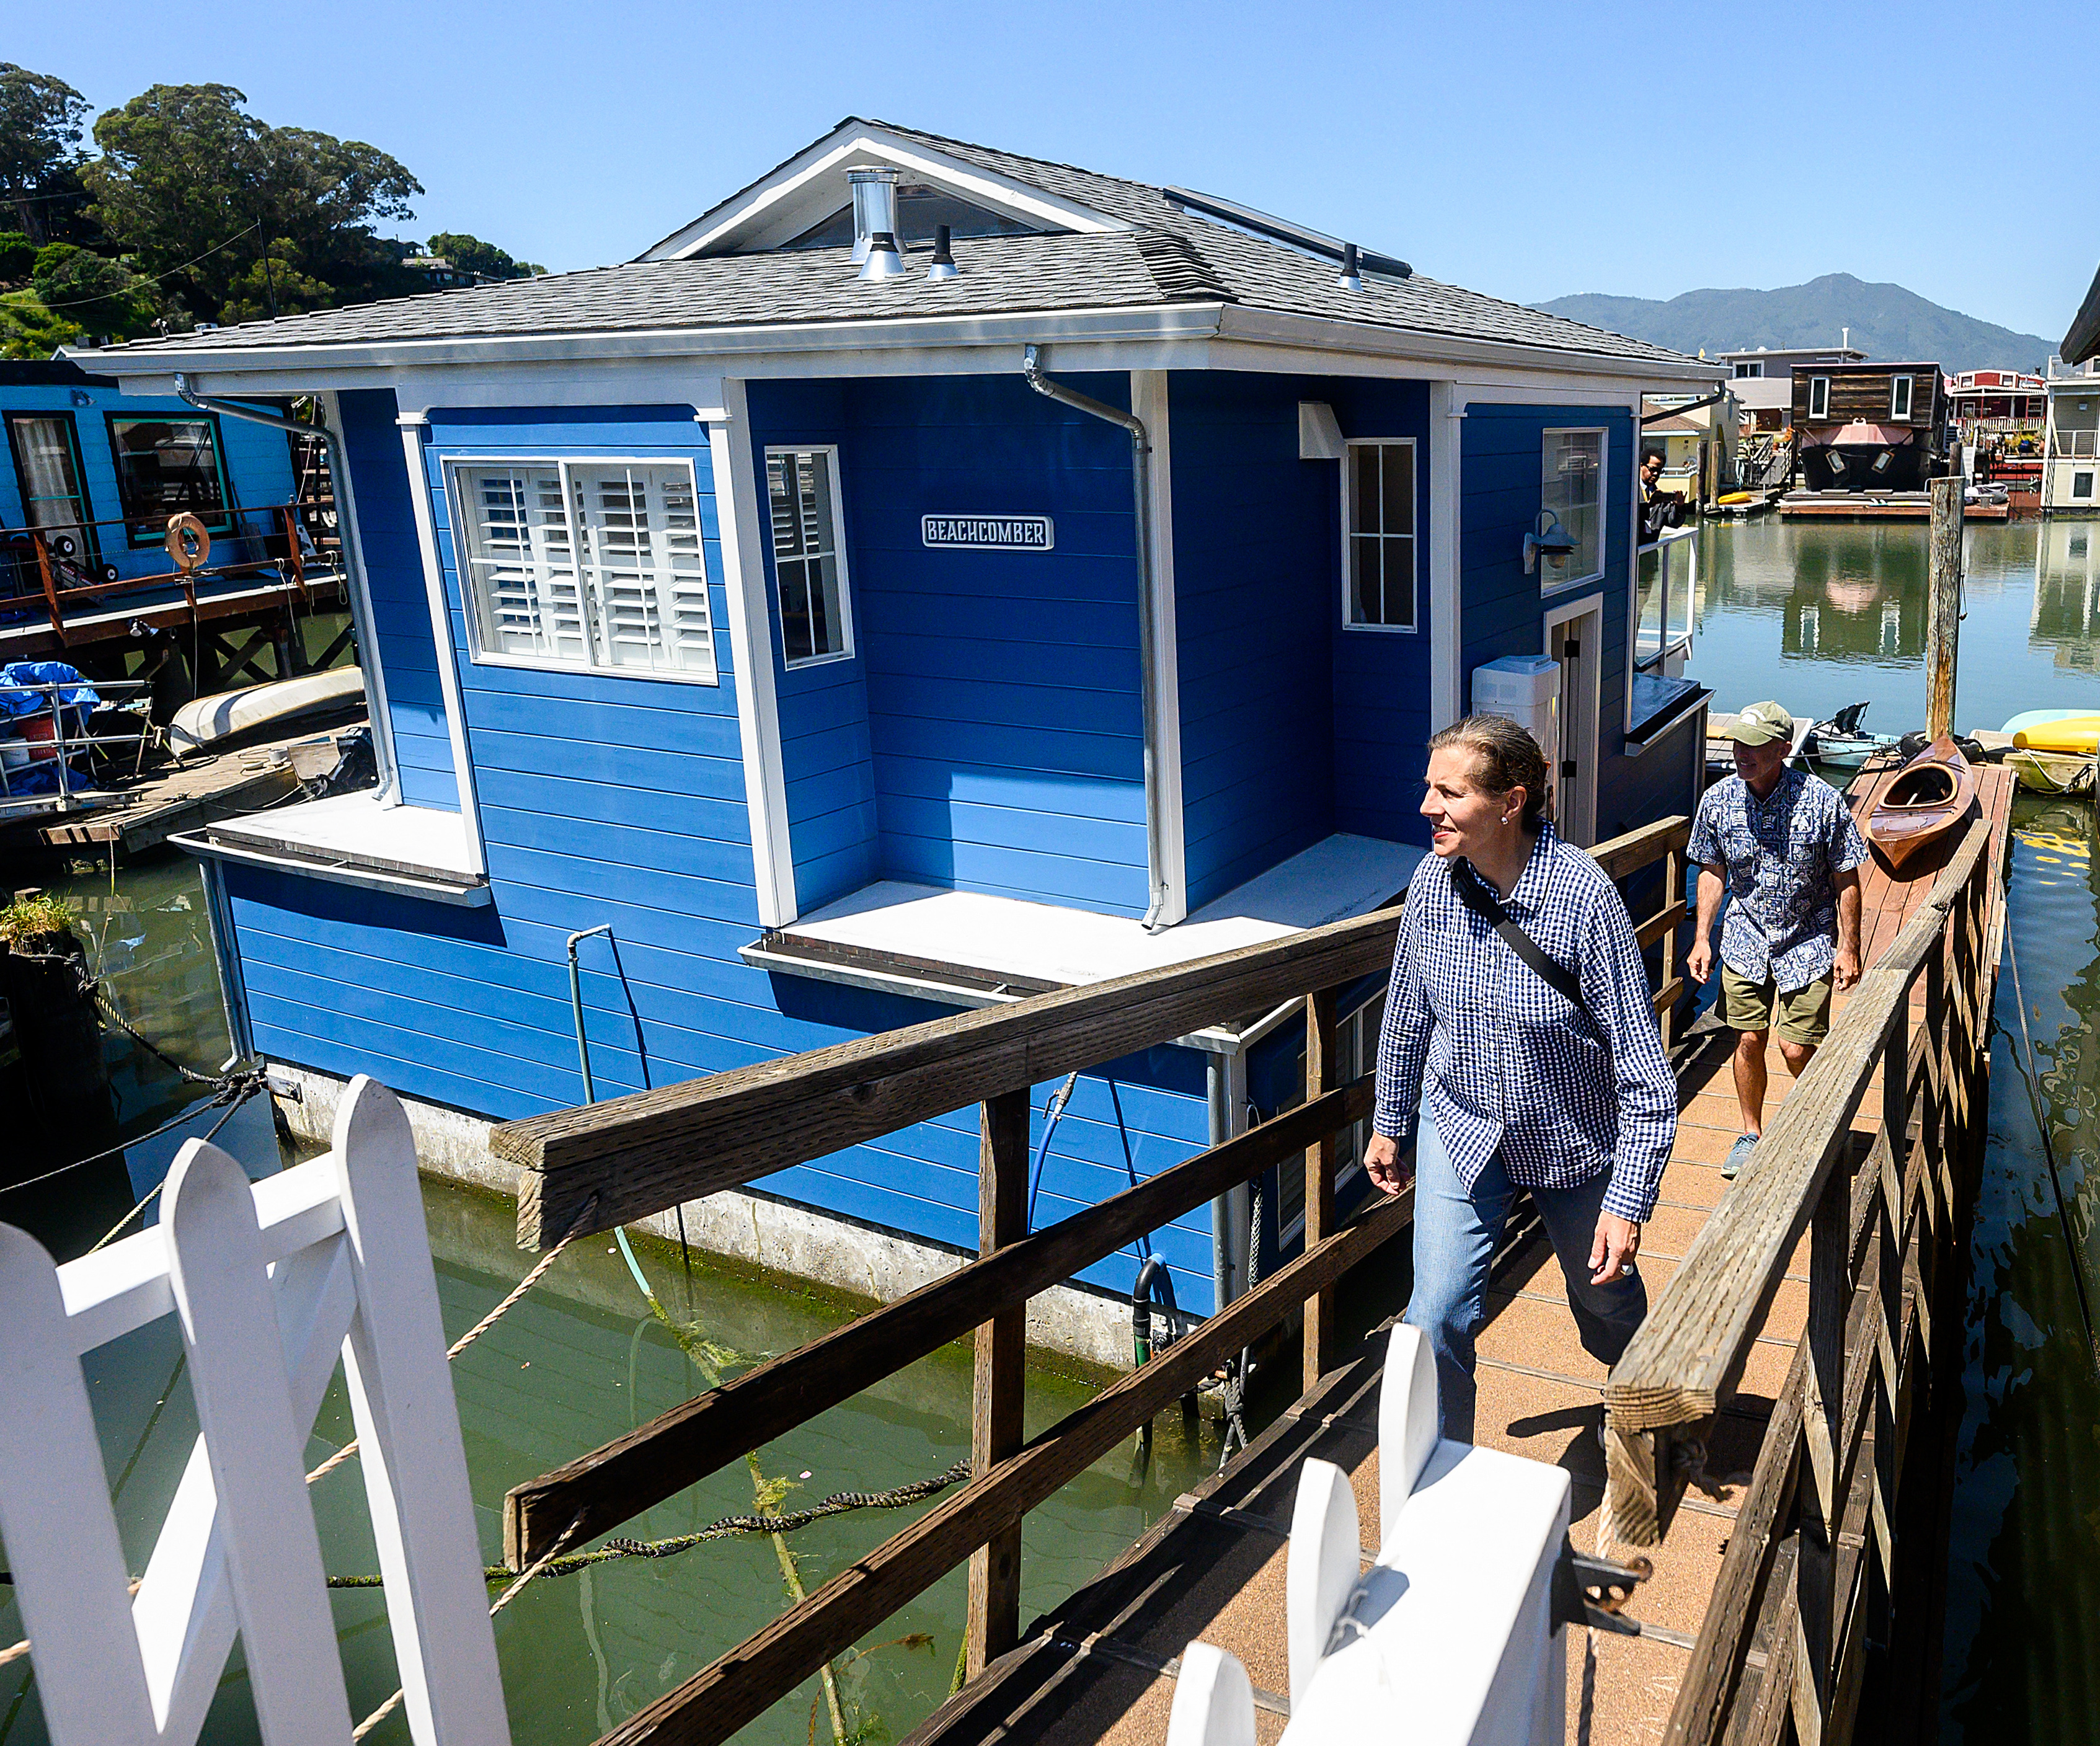 A blue houseboat named &quot;BEACHCOMBER&quot; with people walking on a dock, surrounded by other colorful floating homes.